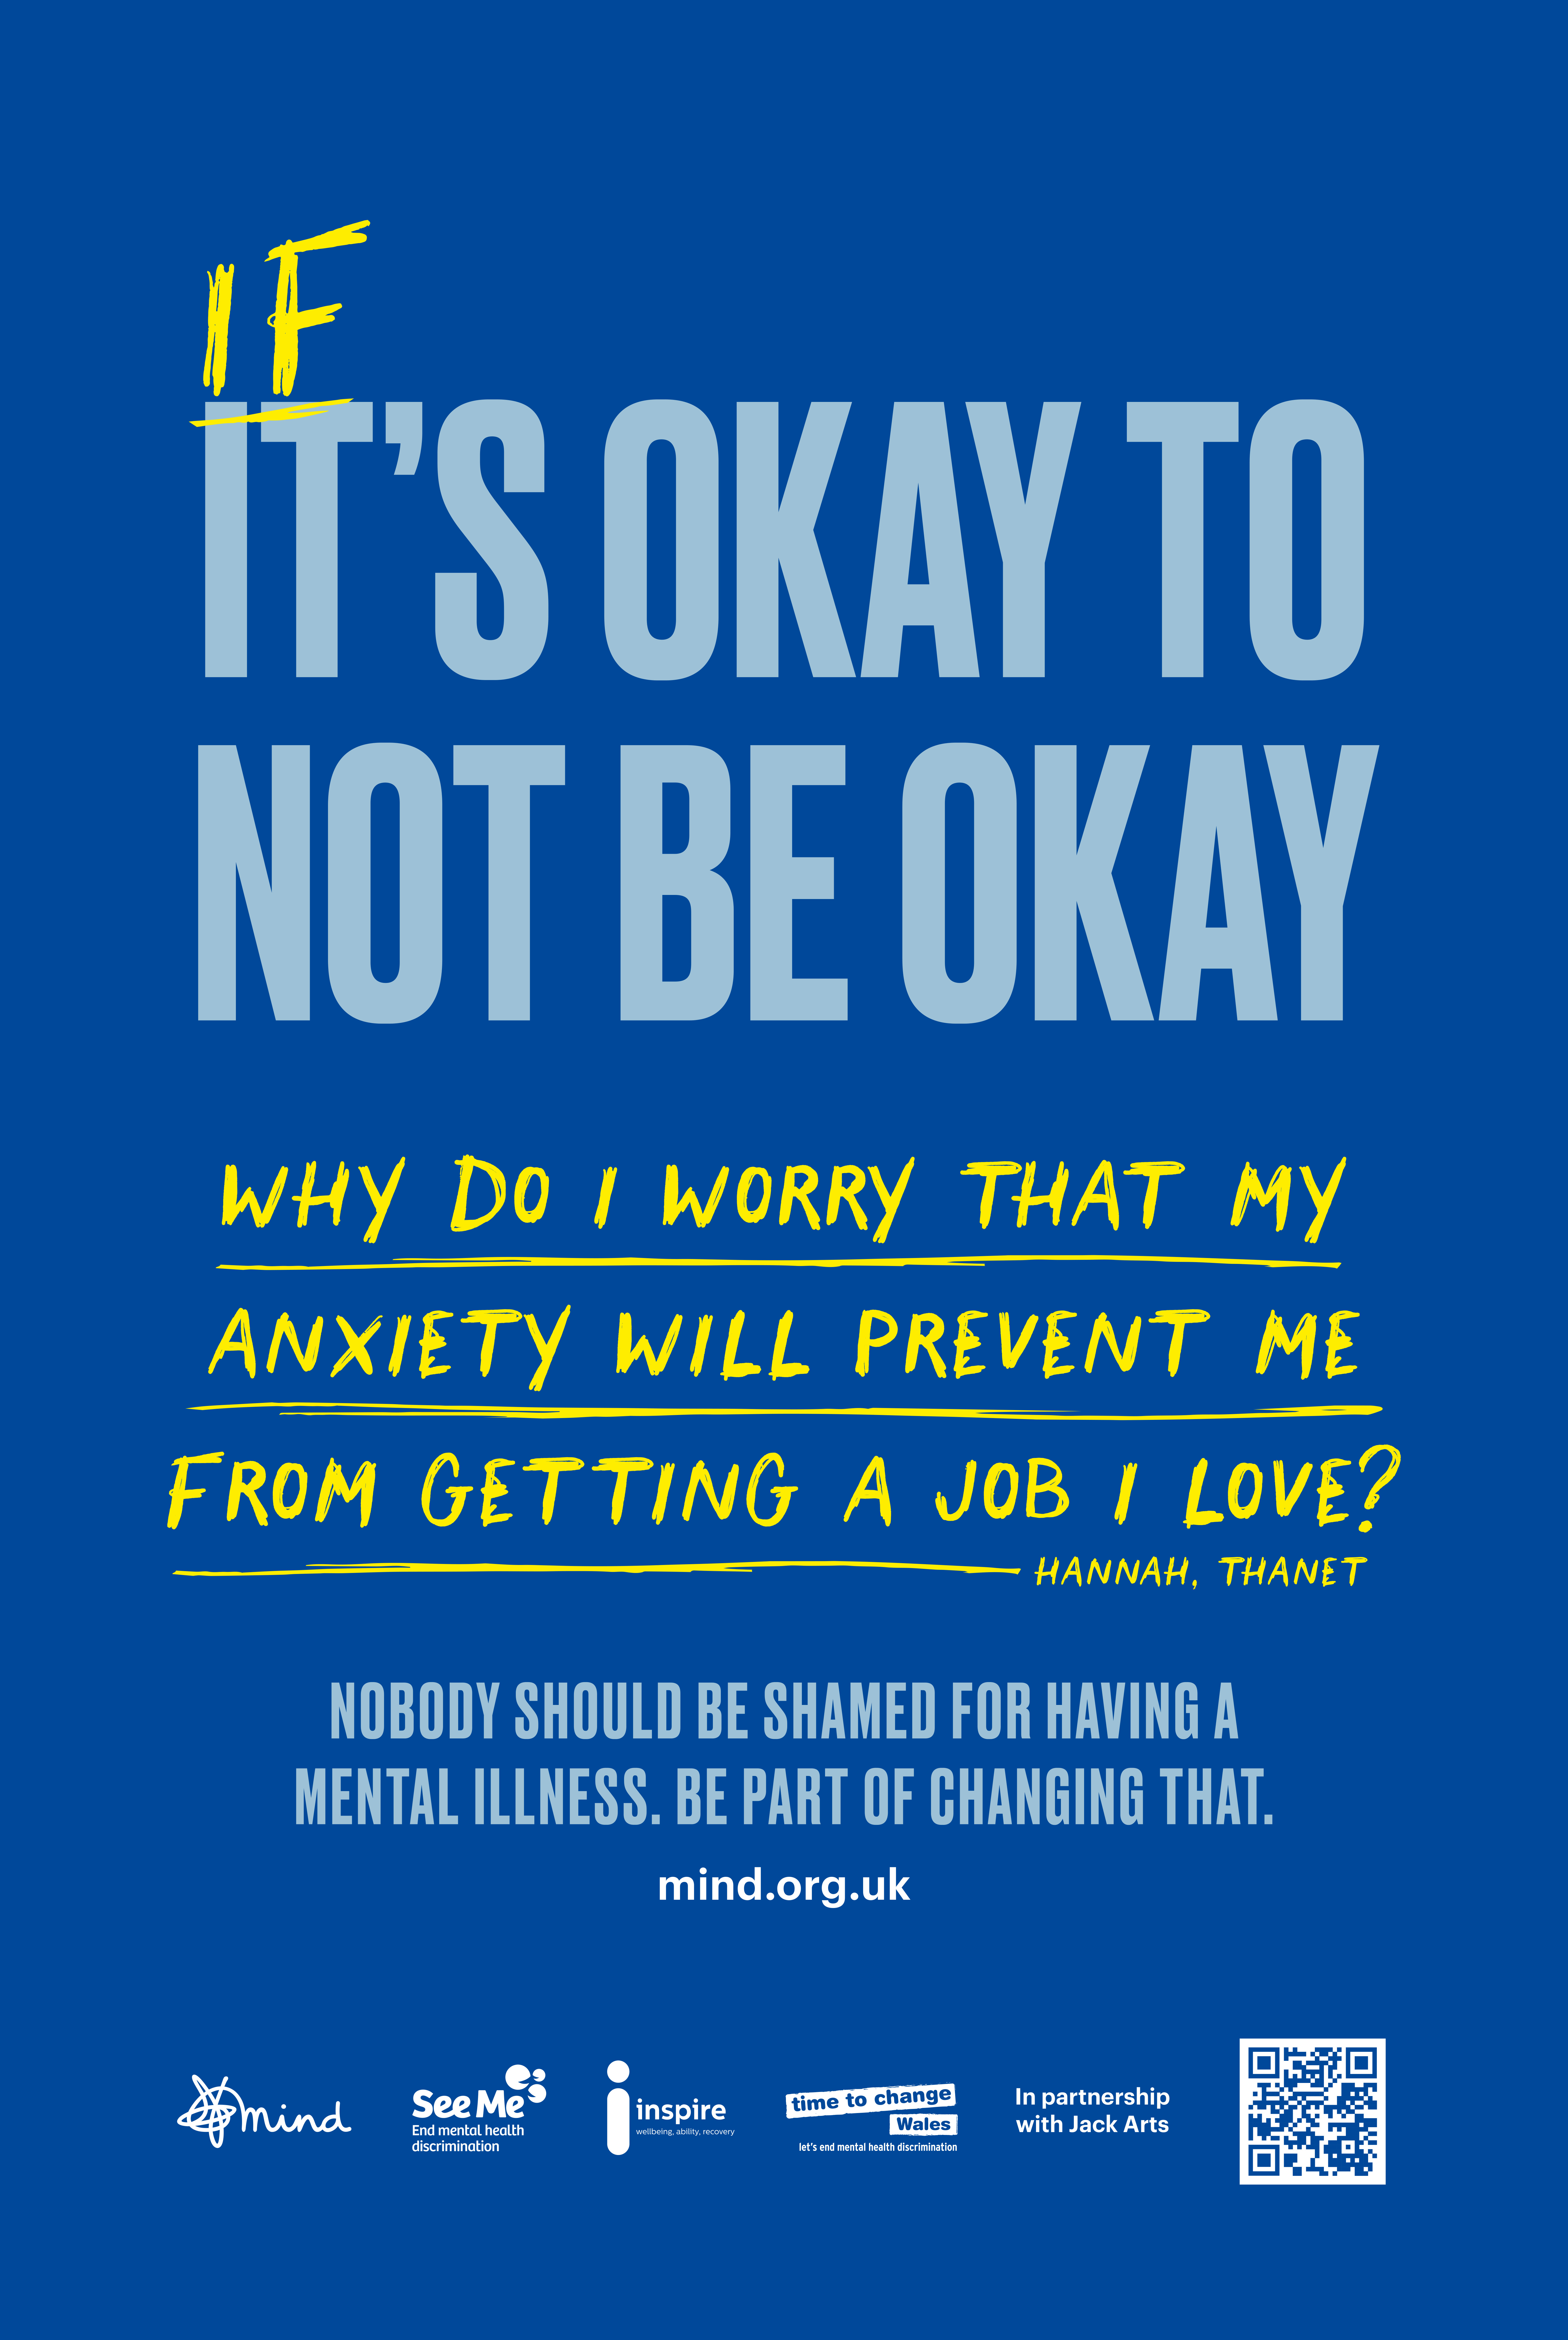 Campaign image that says 'If it's okay to not be okay, why do I worry that my anxiety will prevent me from getting a job I love?'